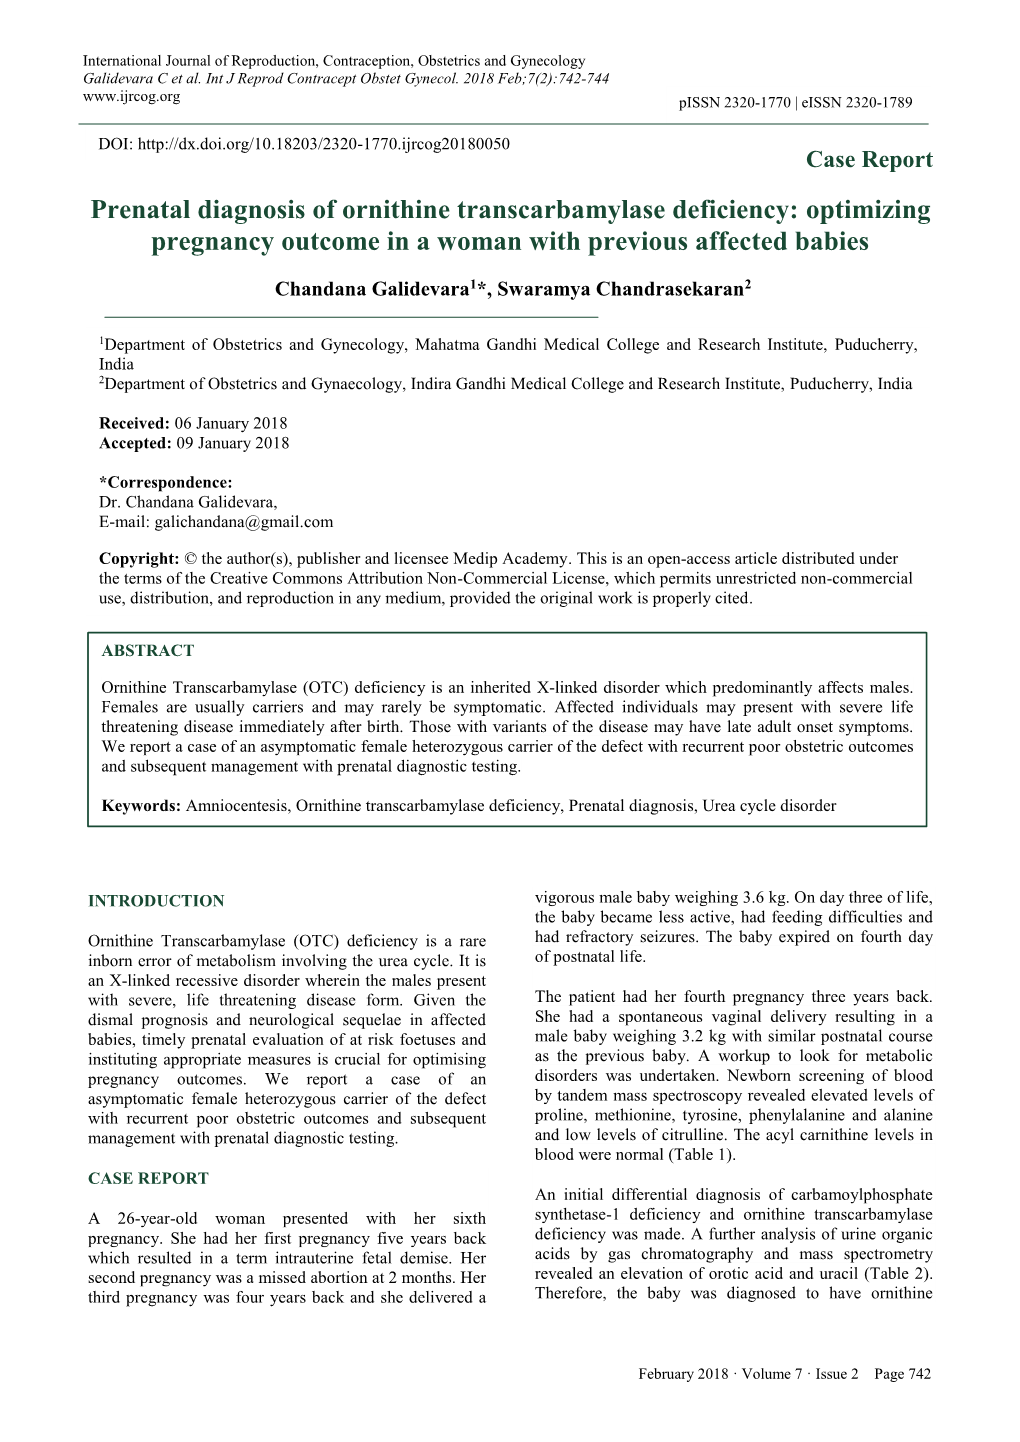 Prenatal Diagnosis of Ornithine Transcarbamylase Deficiency: Optimizing Pregnancy Outcome in a Woman with Previous Affected Babies